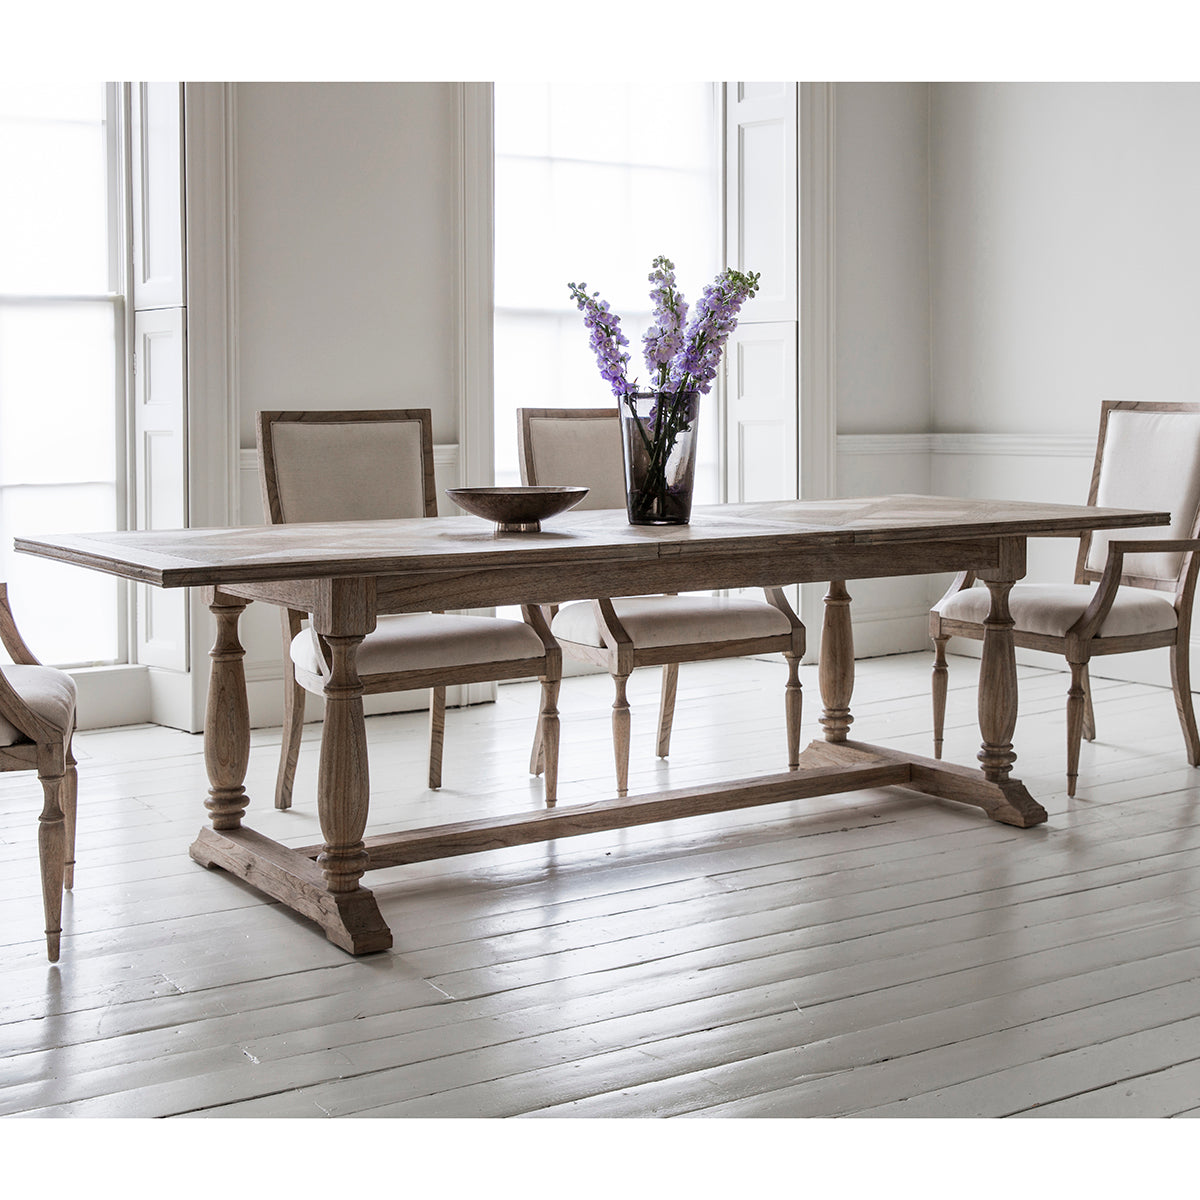 A Belsford Extending Dining Table 2500x1000x750mm with four chairs in a room with white walls from Kikiathome.co.uk, perfect for home furniture and interior